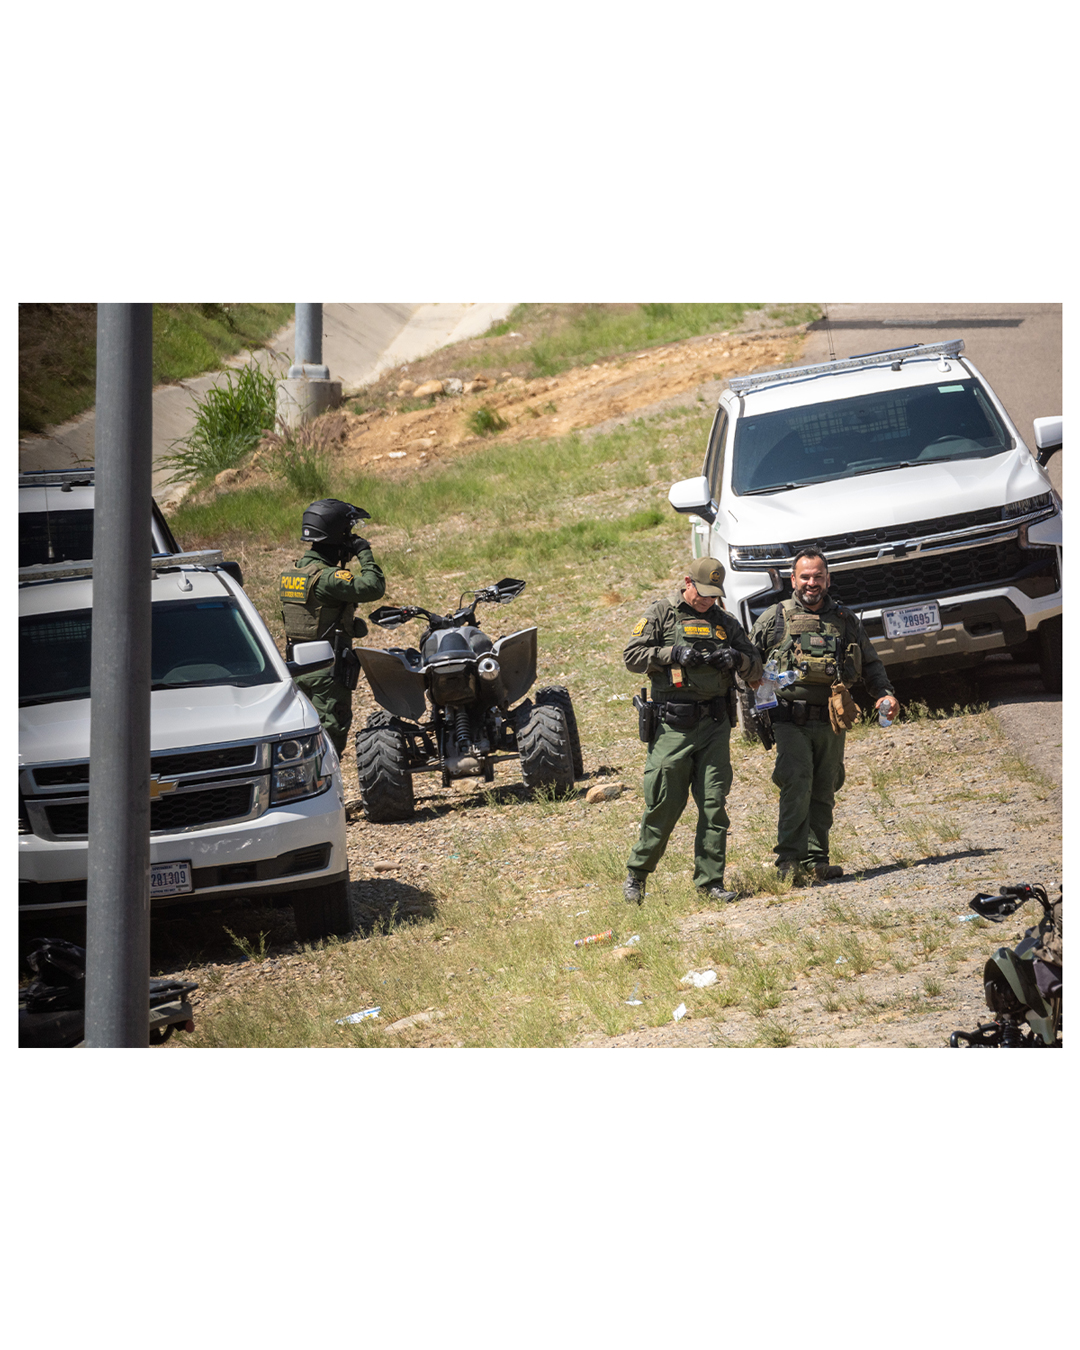 Two border patrol agents walk toward the camera, flanked by border patrol vehicles on both sides. Behind them, a third border patrol agent fiddles with the strap on his helmet as he stands beside a border patrol ATV.